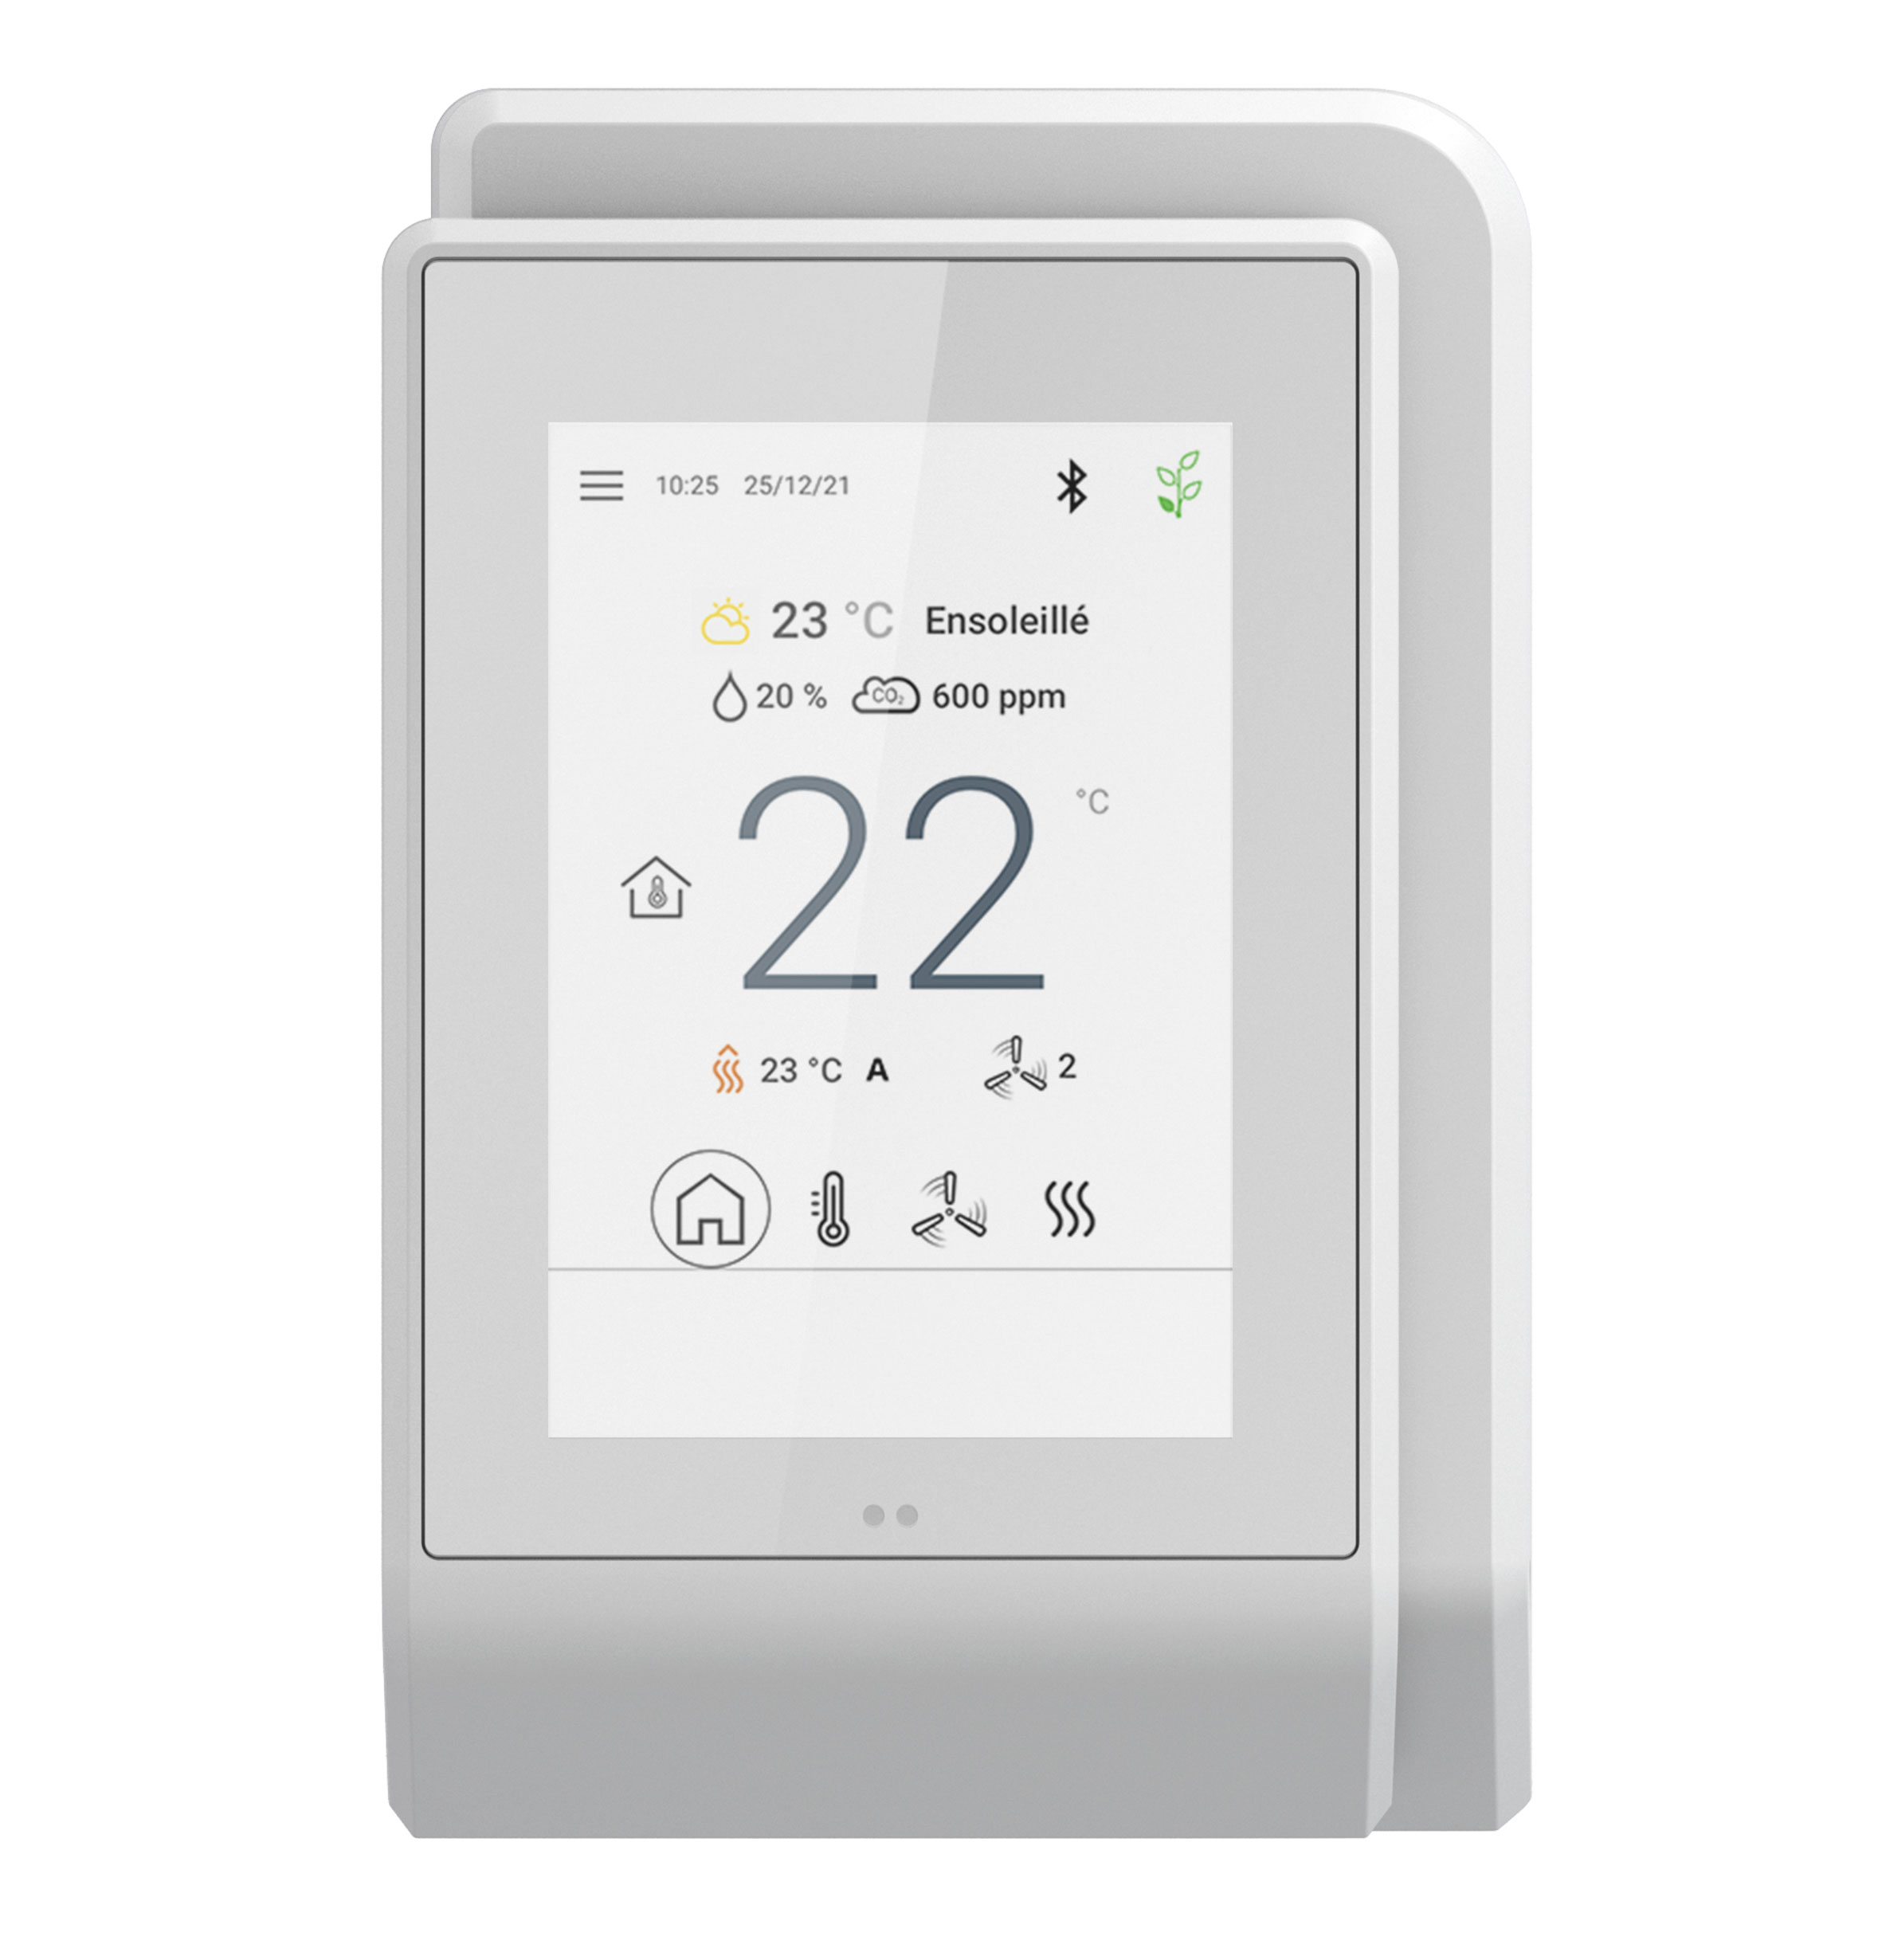 how to adjust distech controls thermostat